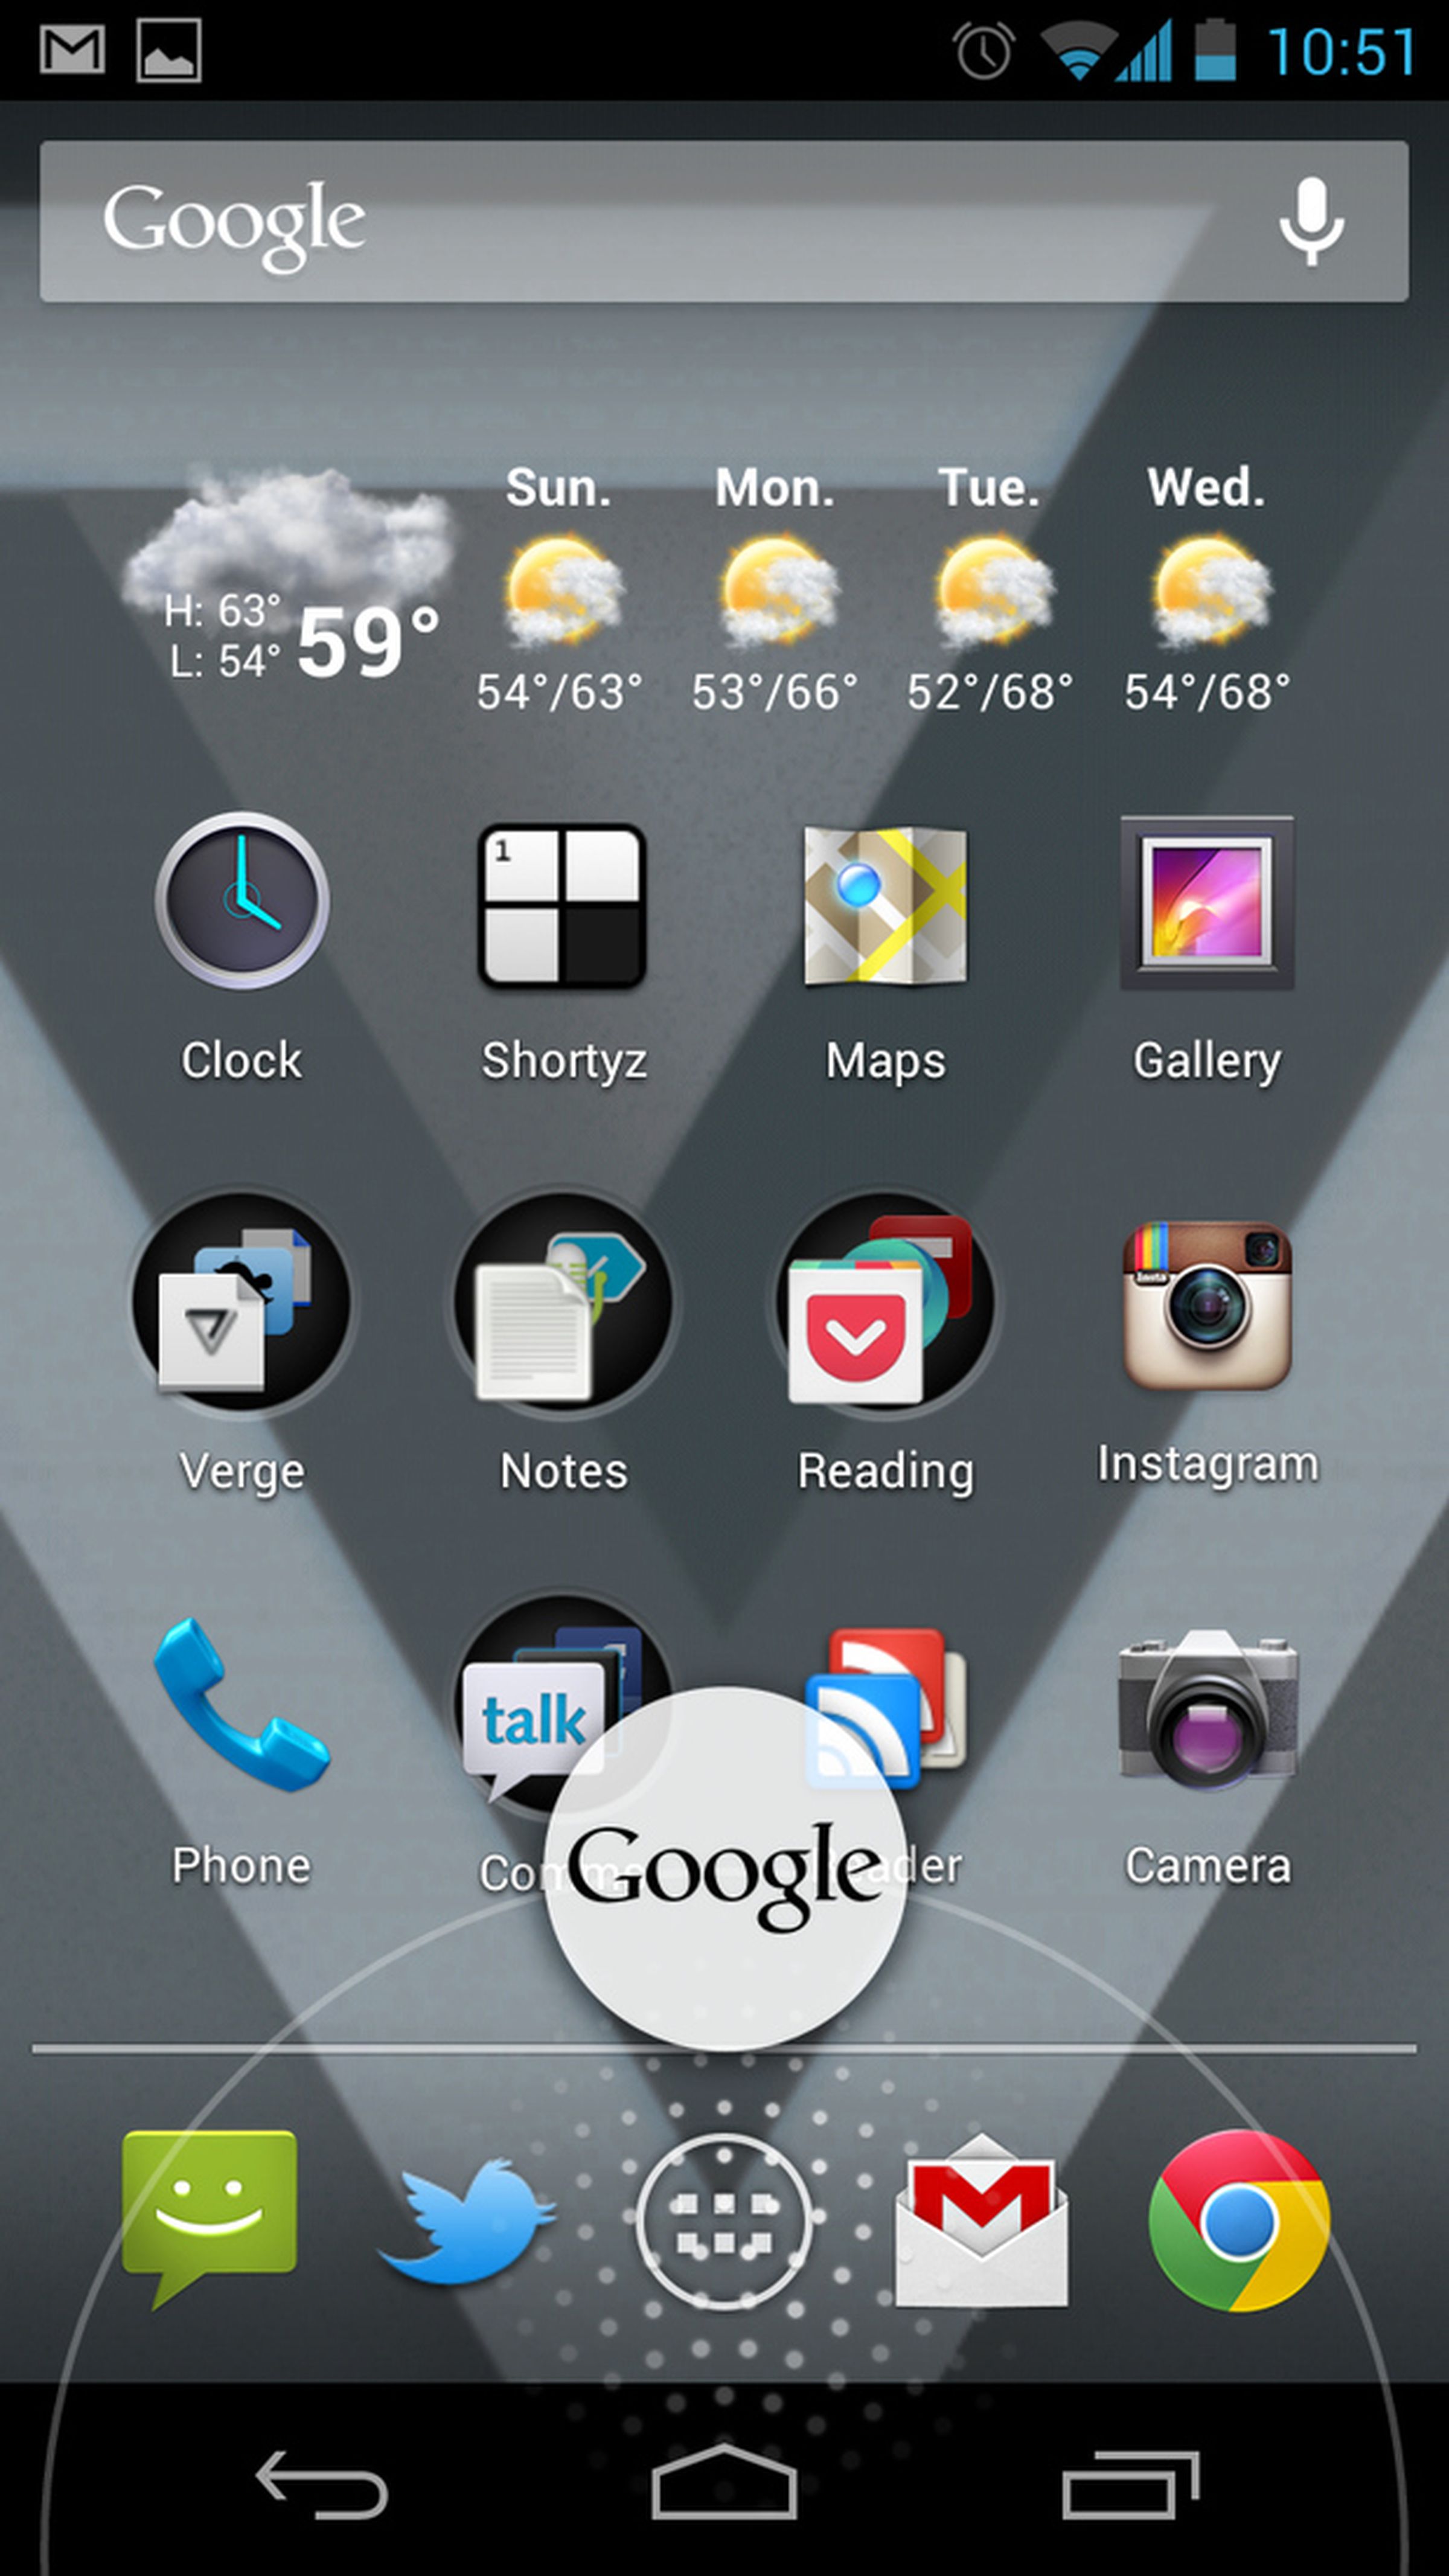 Android 4.1 Jelly Bean review screenshots